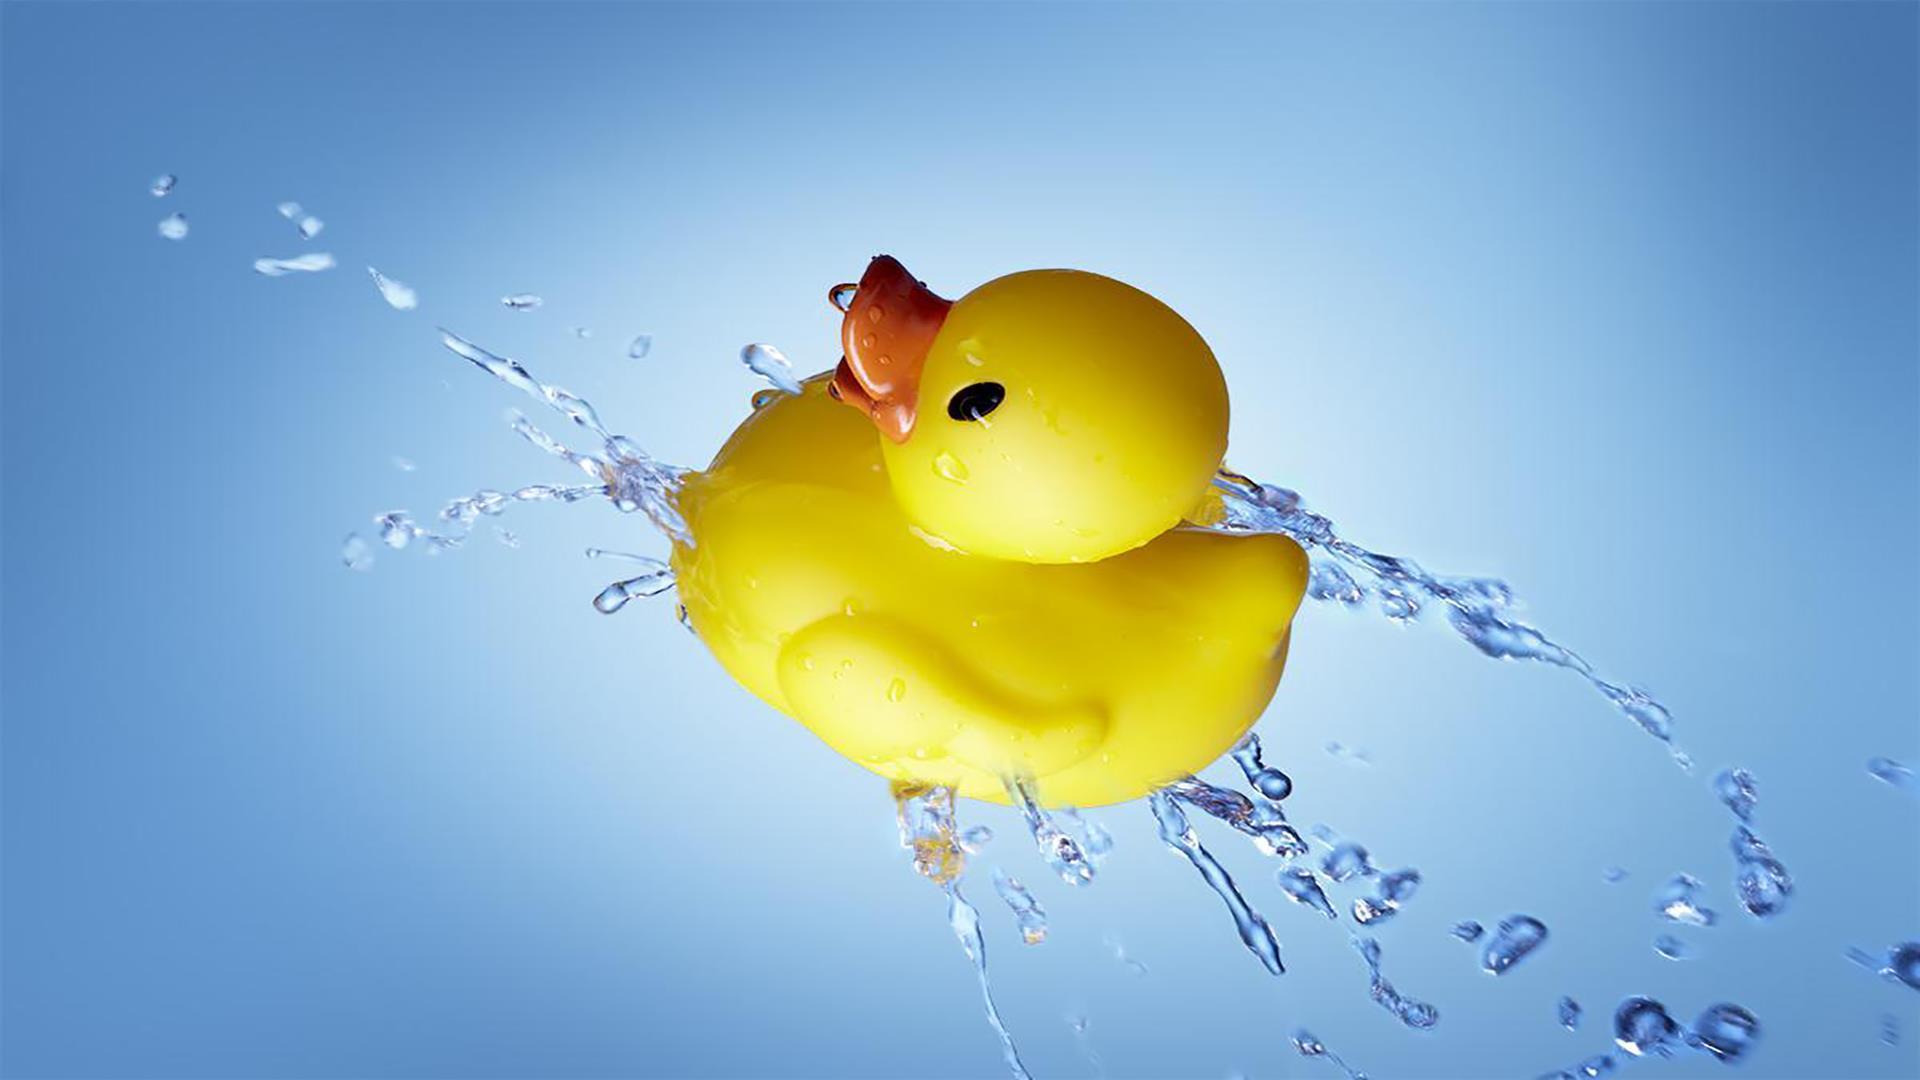 Rubber duck. Live Wallpaper for Android